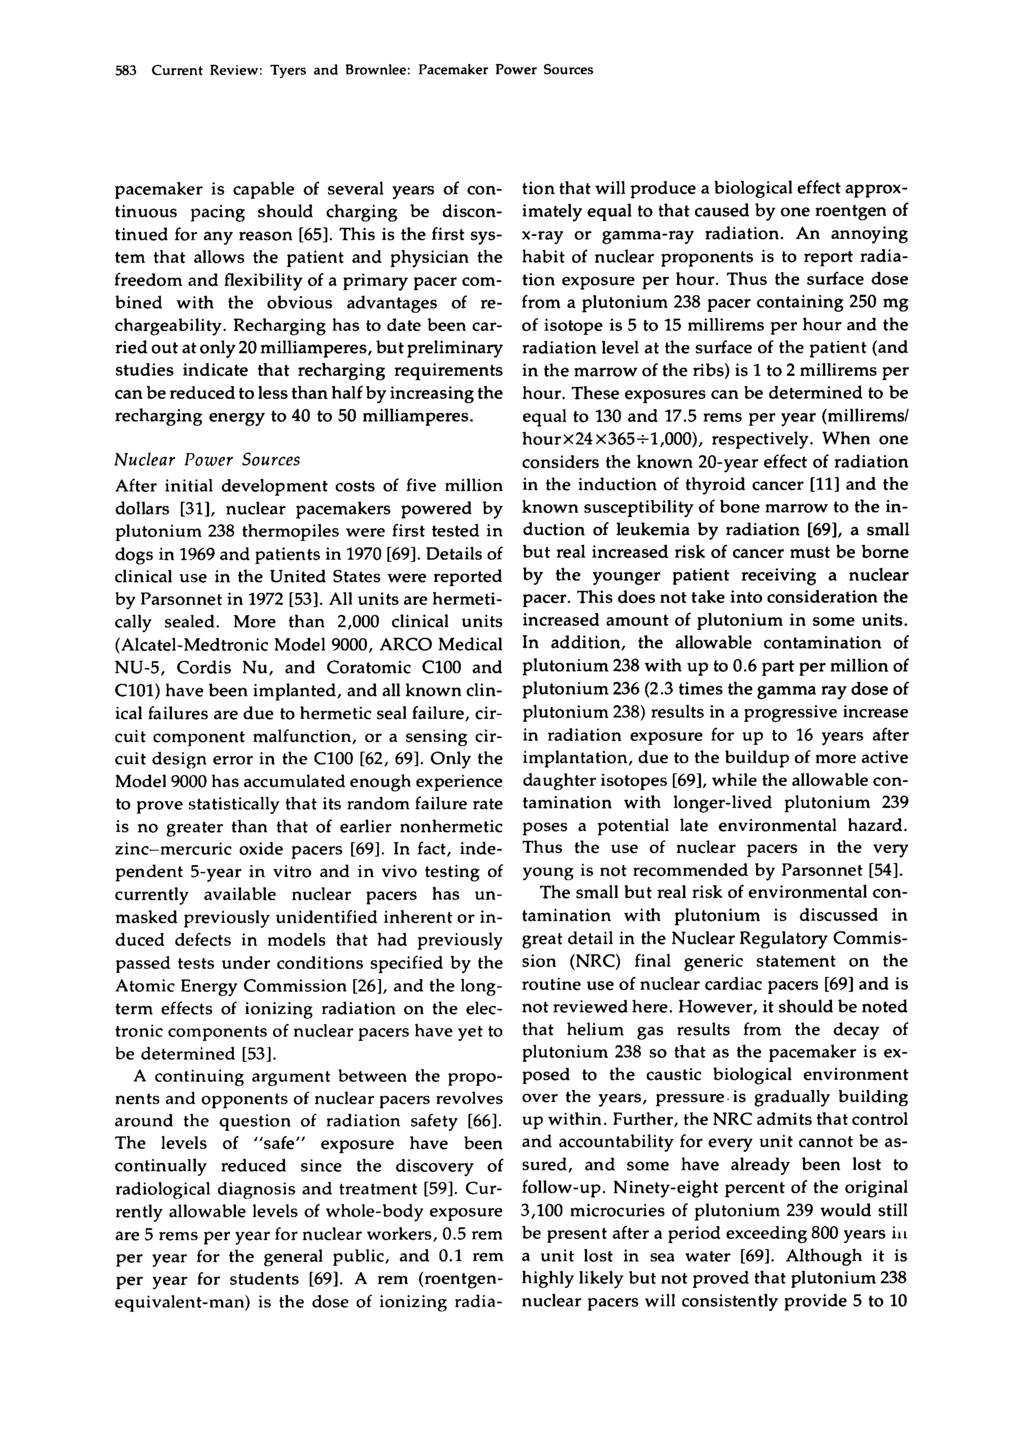 583 Current Review: Tyers and Brownlee: Pacemaker Power Sources pacemaker is capable of several years of continuous pacing should charging be discontinued for any reason [65].